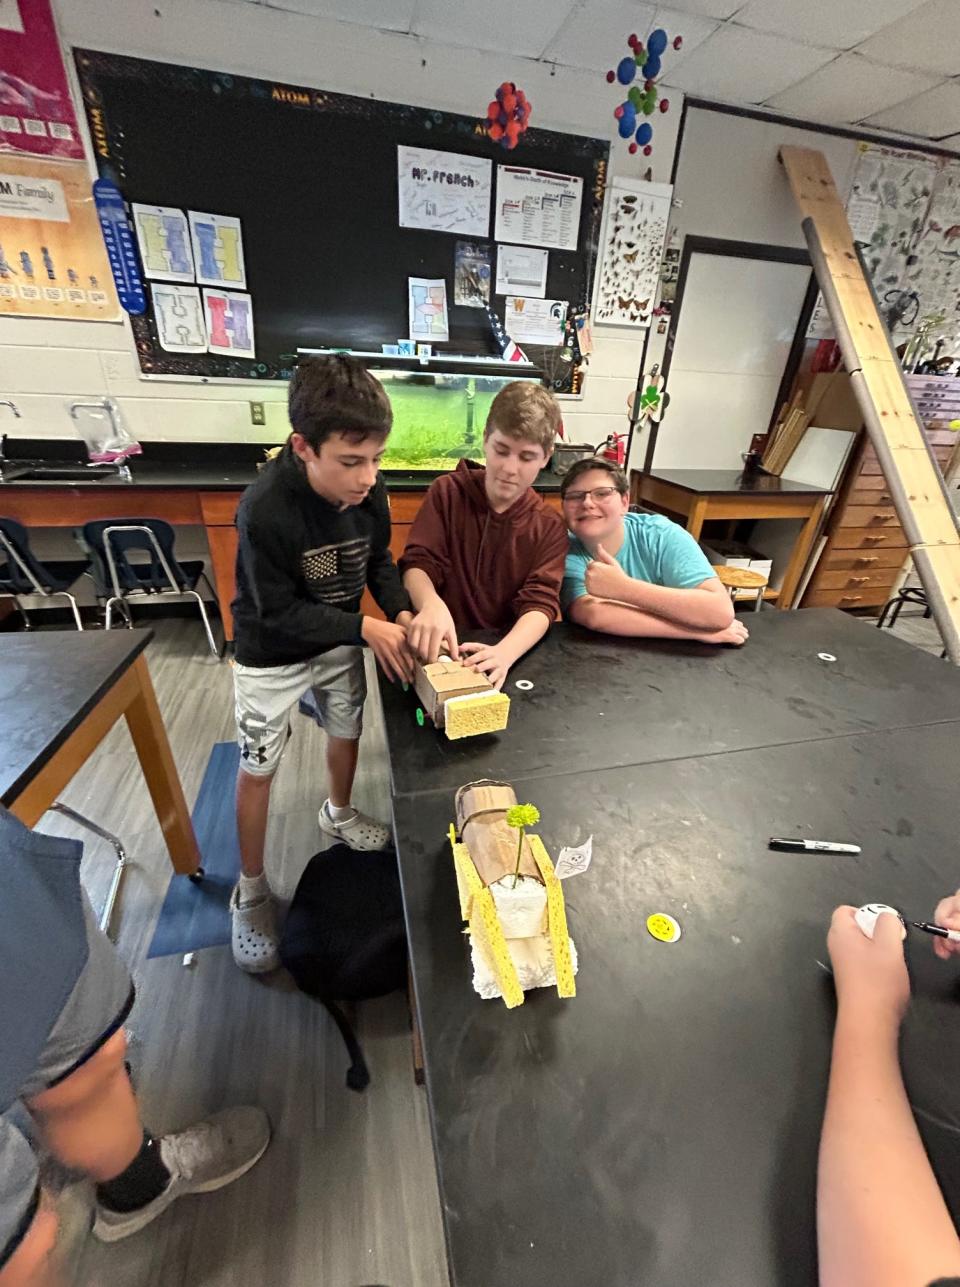 To give students at Hartland Consolidated Schools even more opportunities this year, the district has expanded their science, technology, engineering and mathematics program from K-4 to include fifth to seventh-grade students.